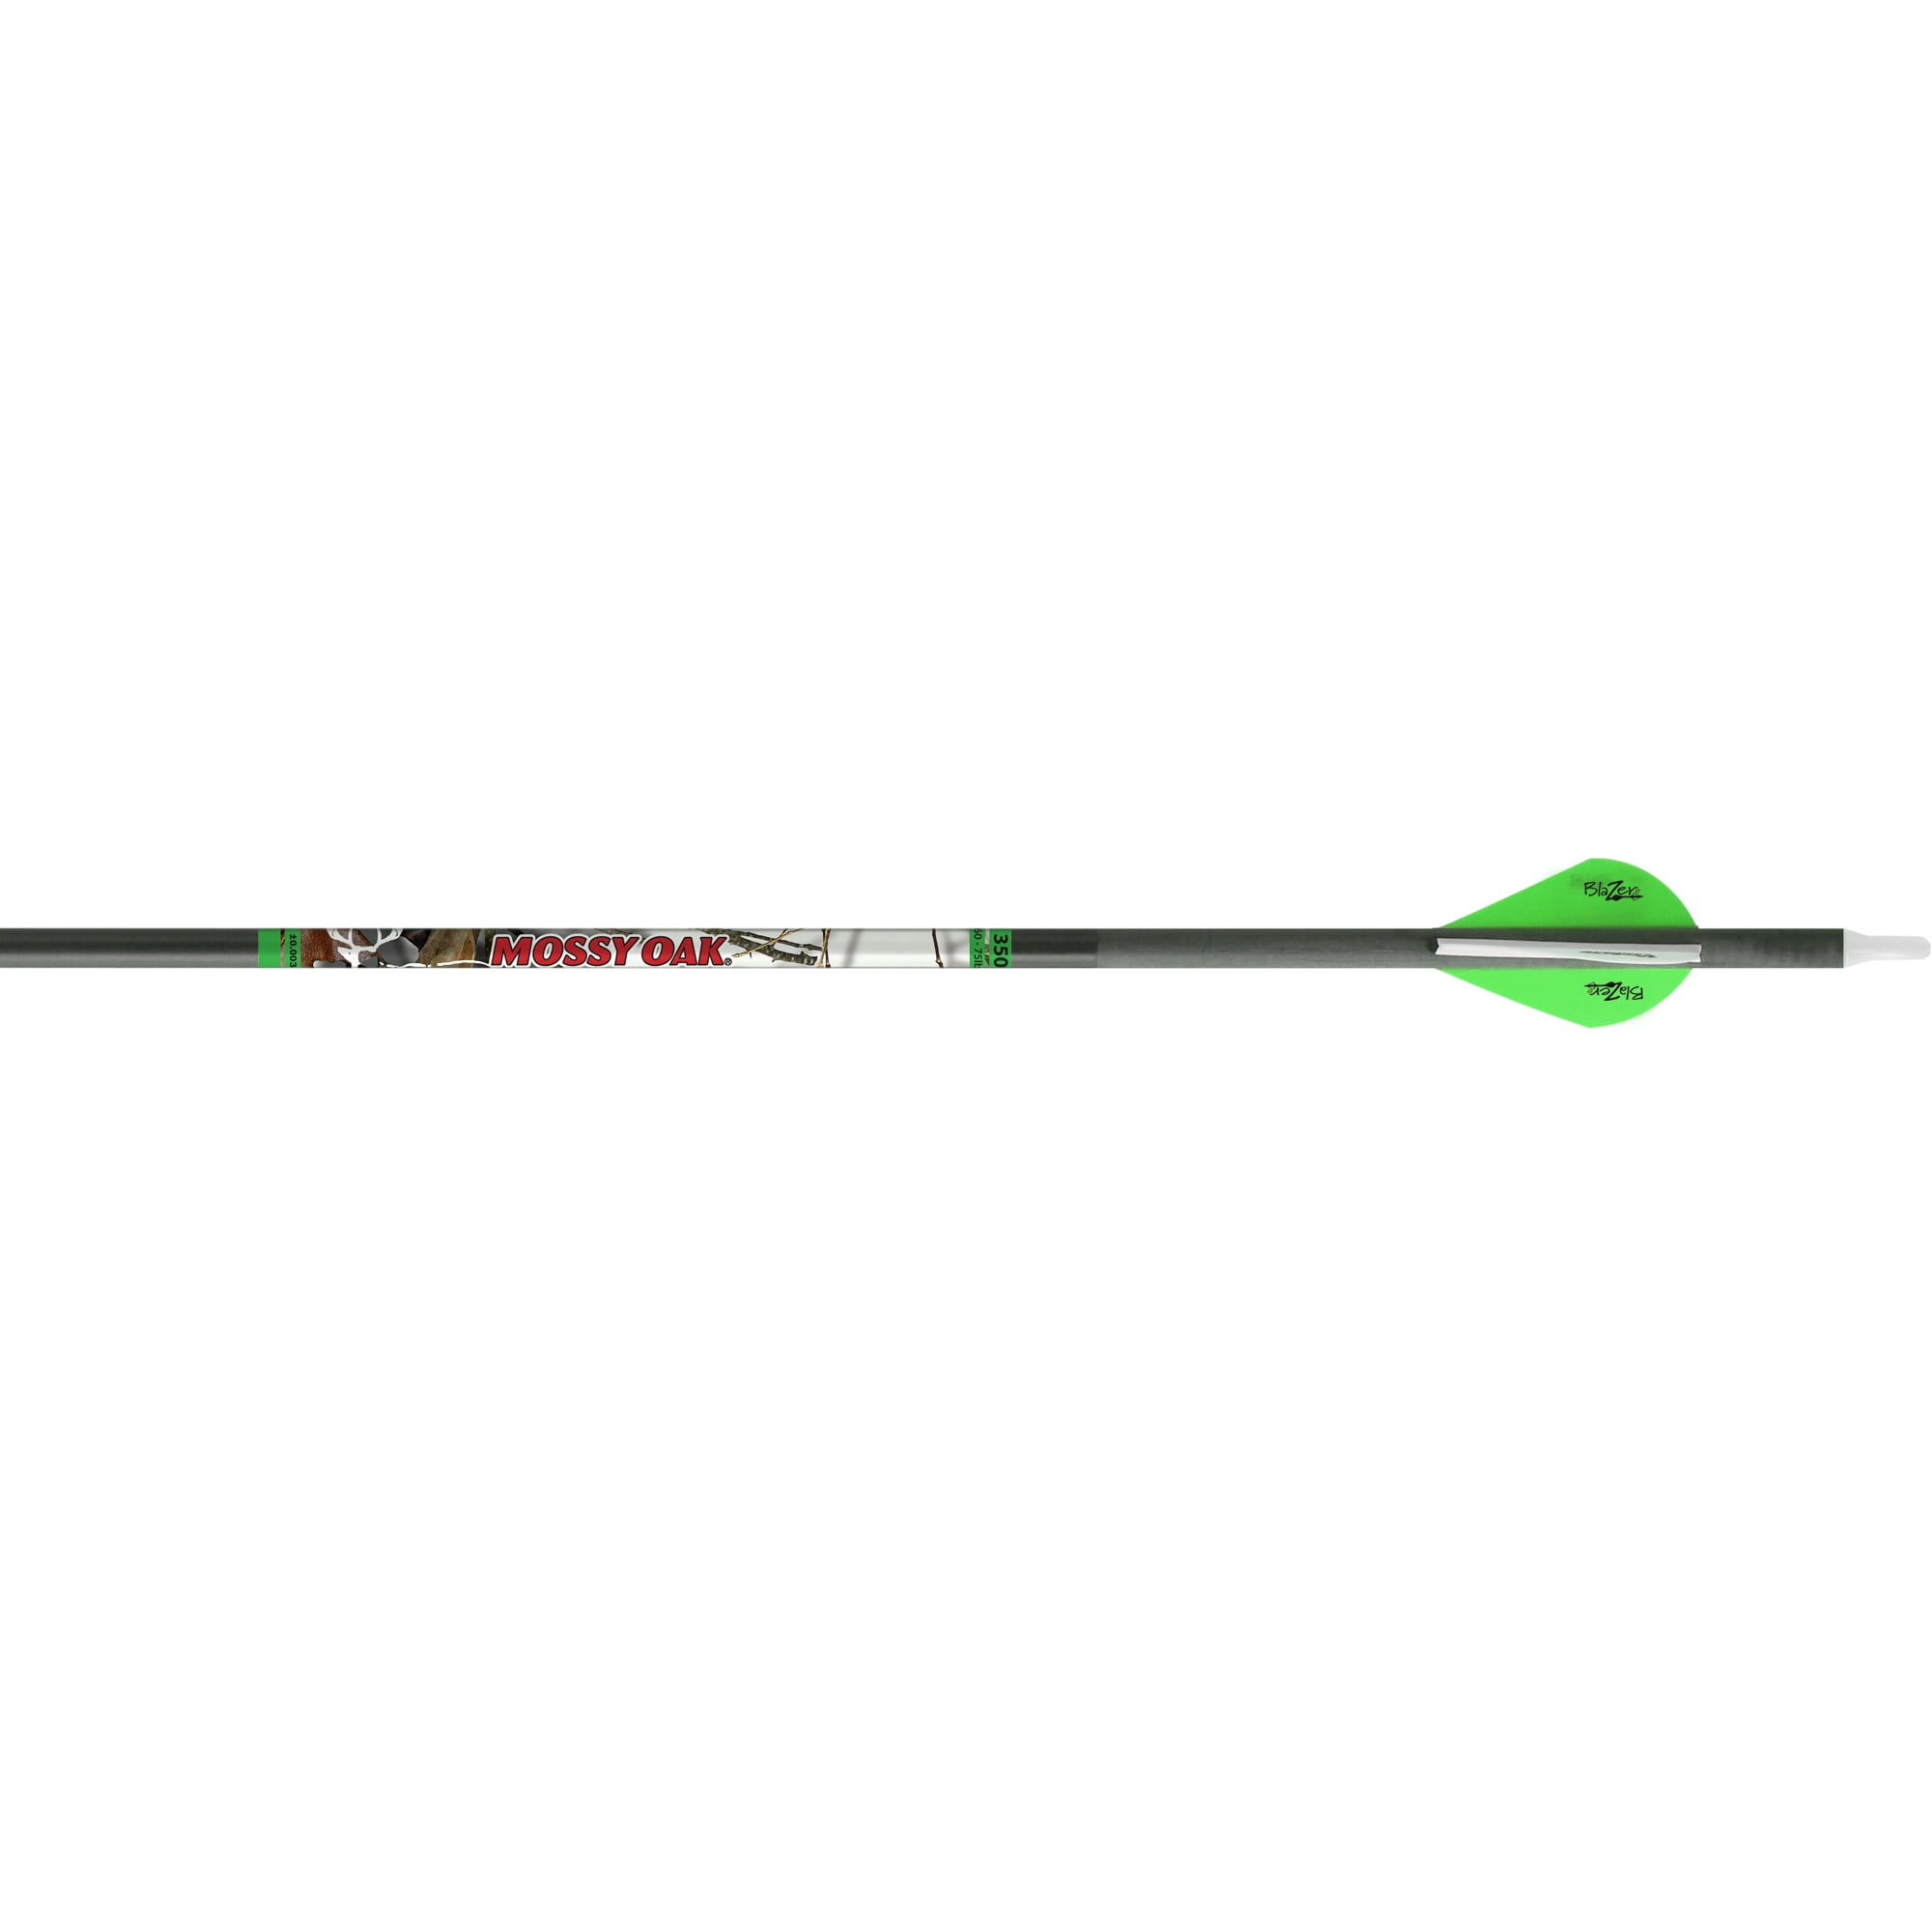 NEW Carbon Express Wolverine Hunter 55-70 6 Arrows Precut 30” with Inserts 